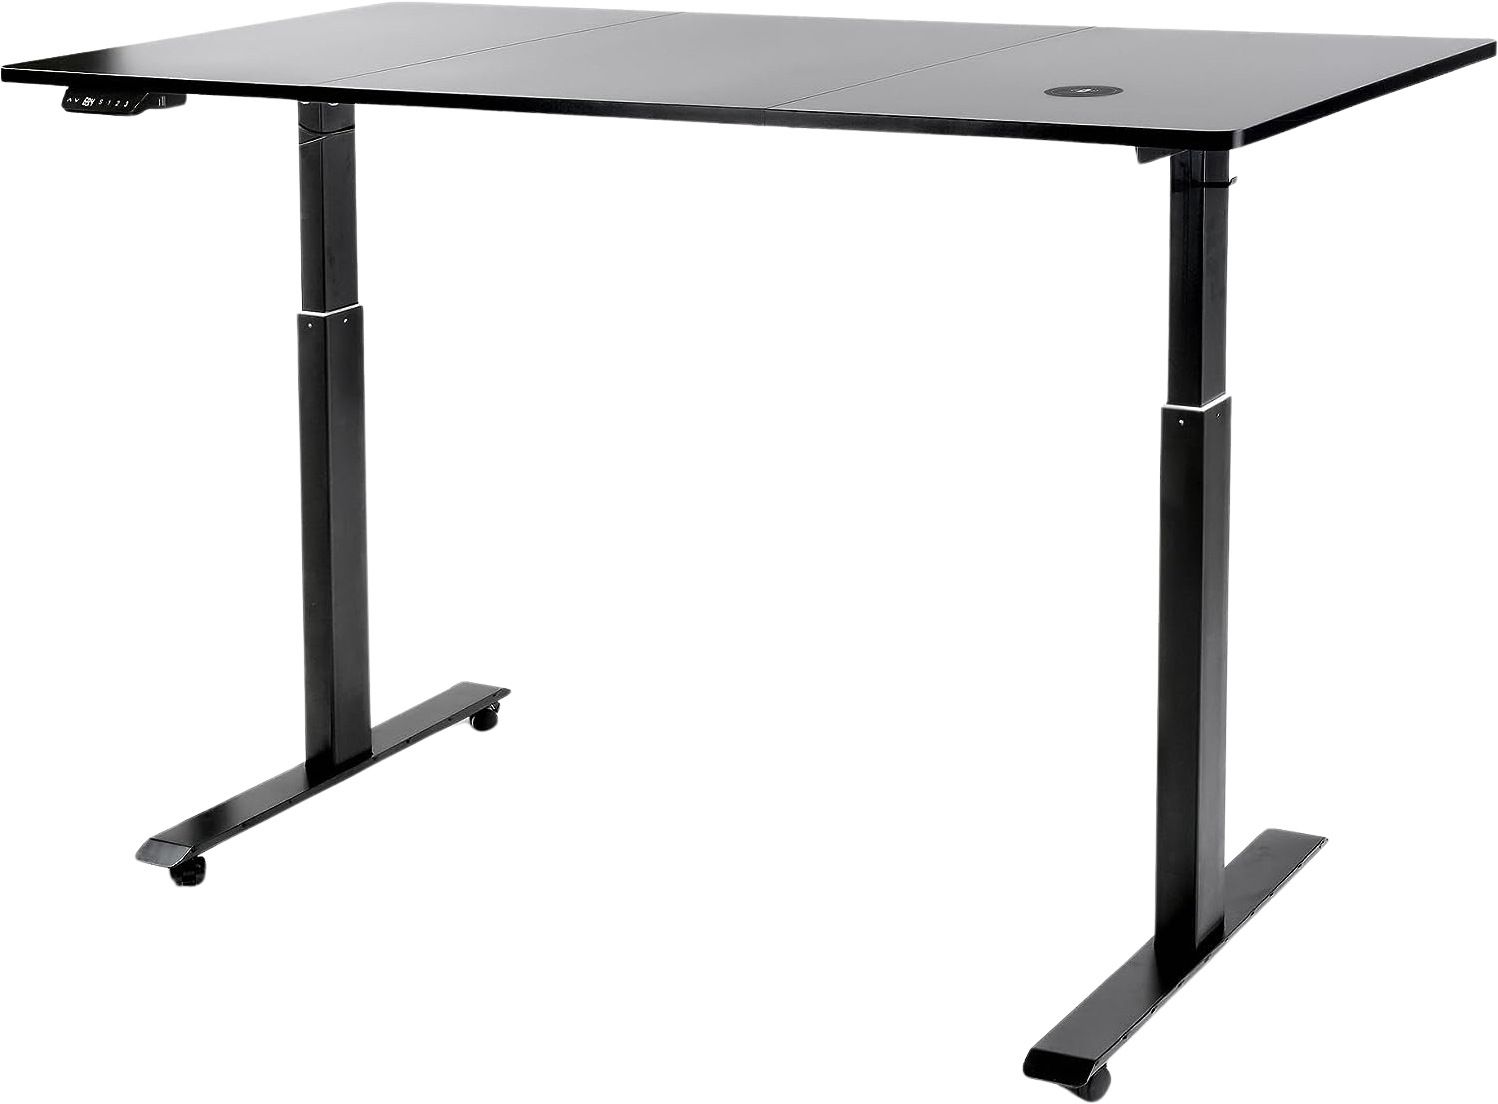 Super Handy, Super Handy GUT154 Standing Desk with Wireless Charging 3 Memory Presets 63'' x 30'' Adjustable Height up to 49'' Engineered Wood Black New